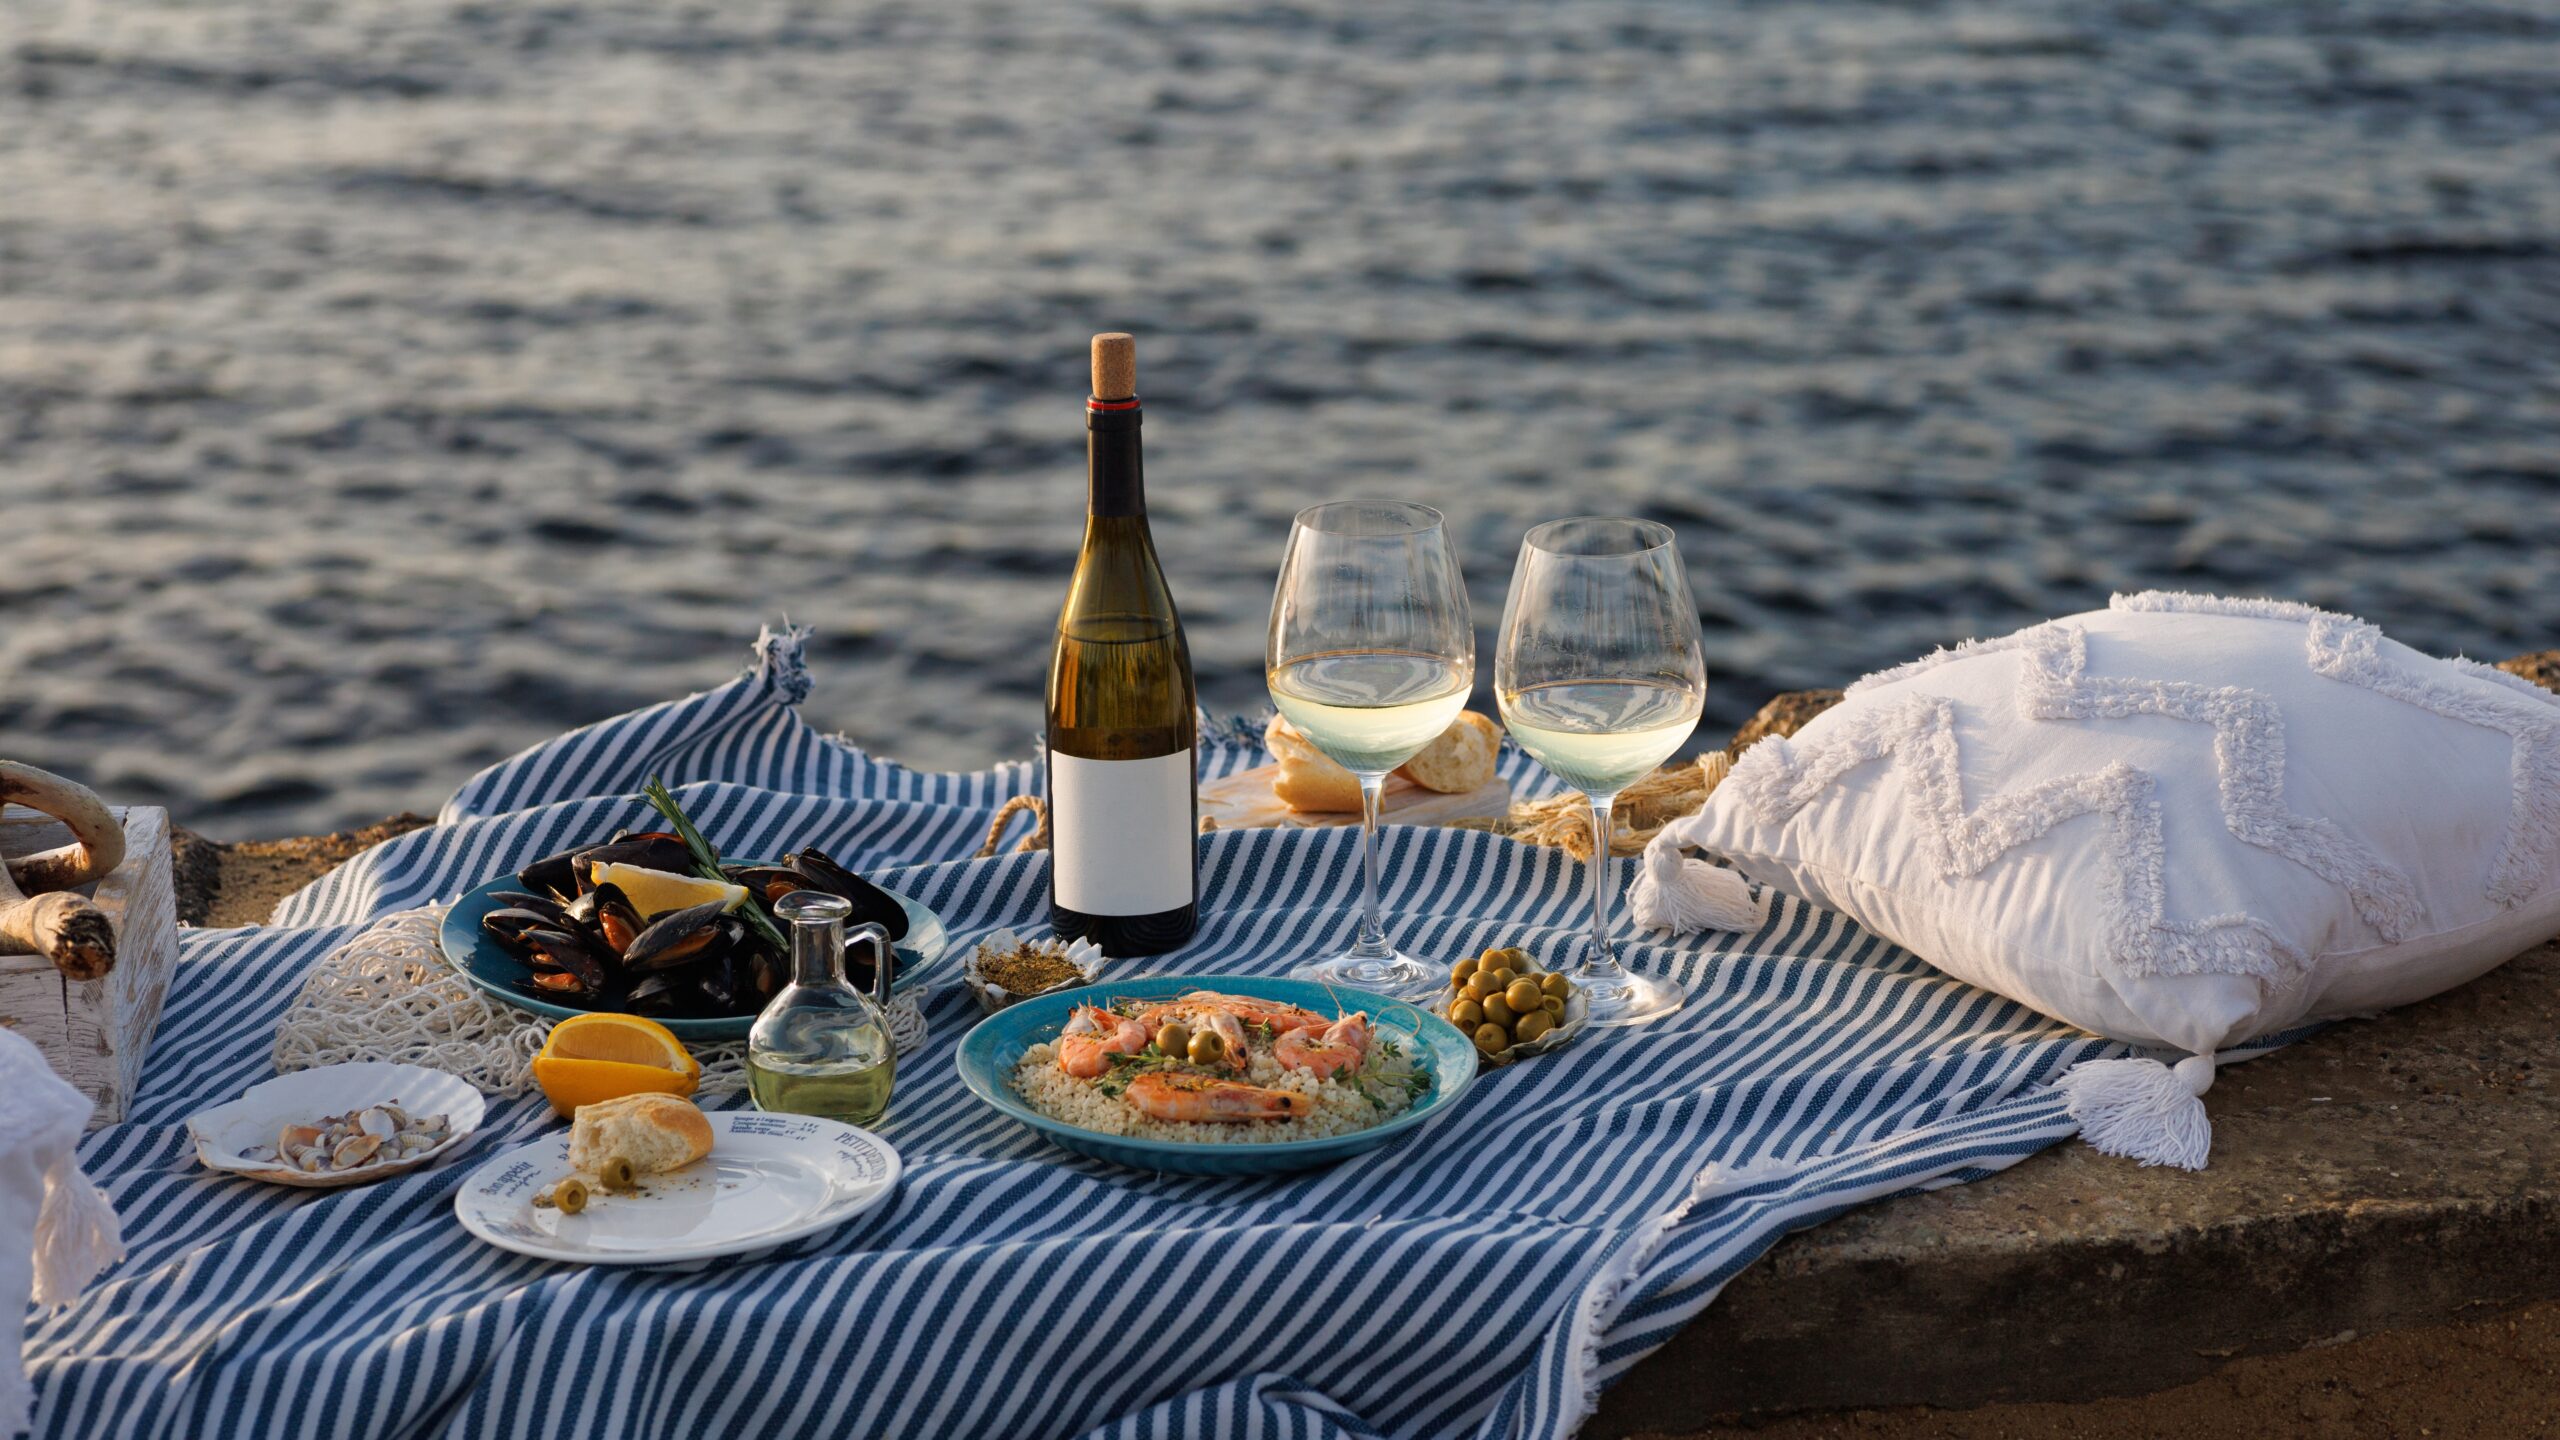 Seafood delicacies and two glasses of wine with a sea view in Mykonos